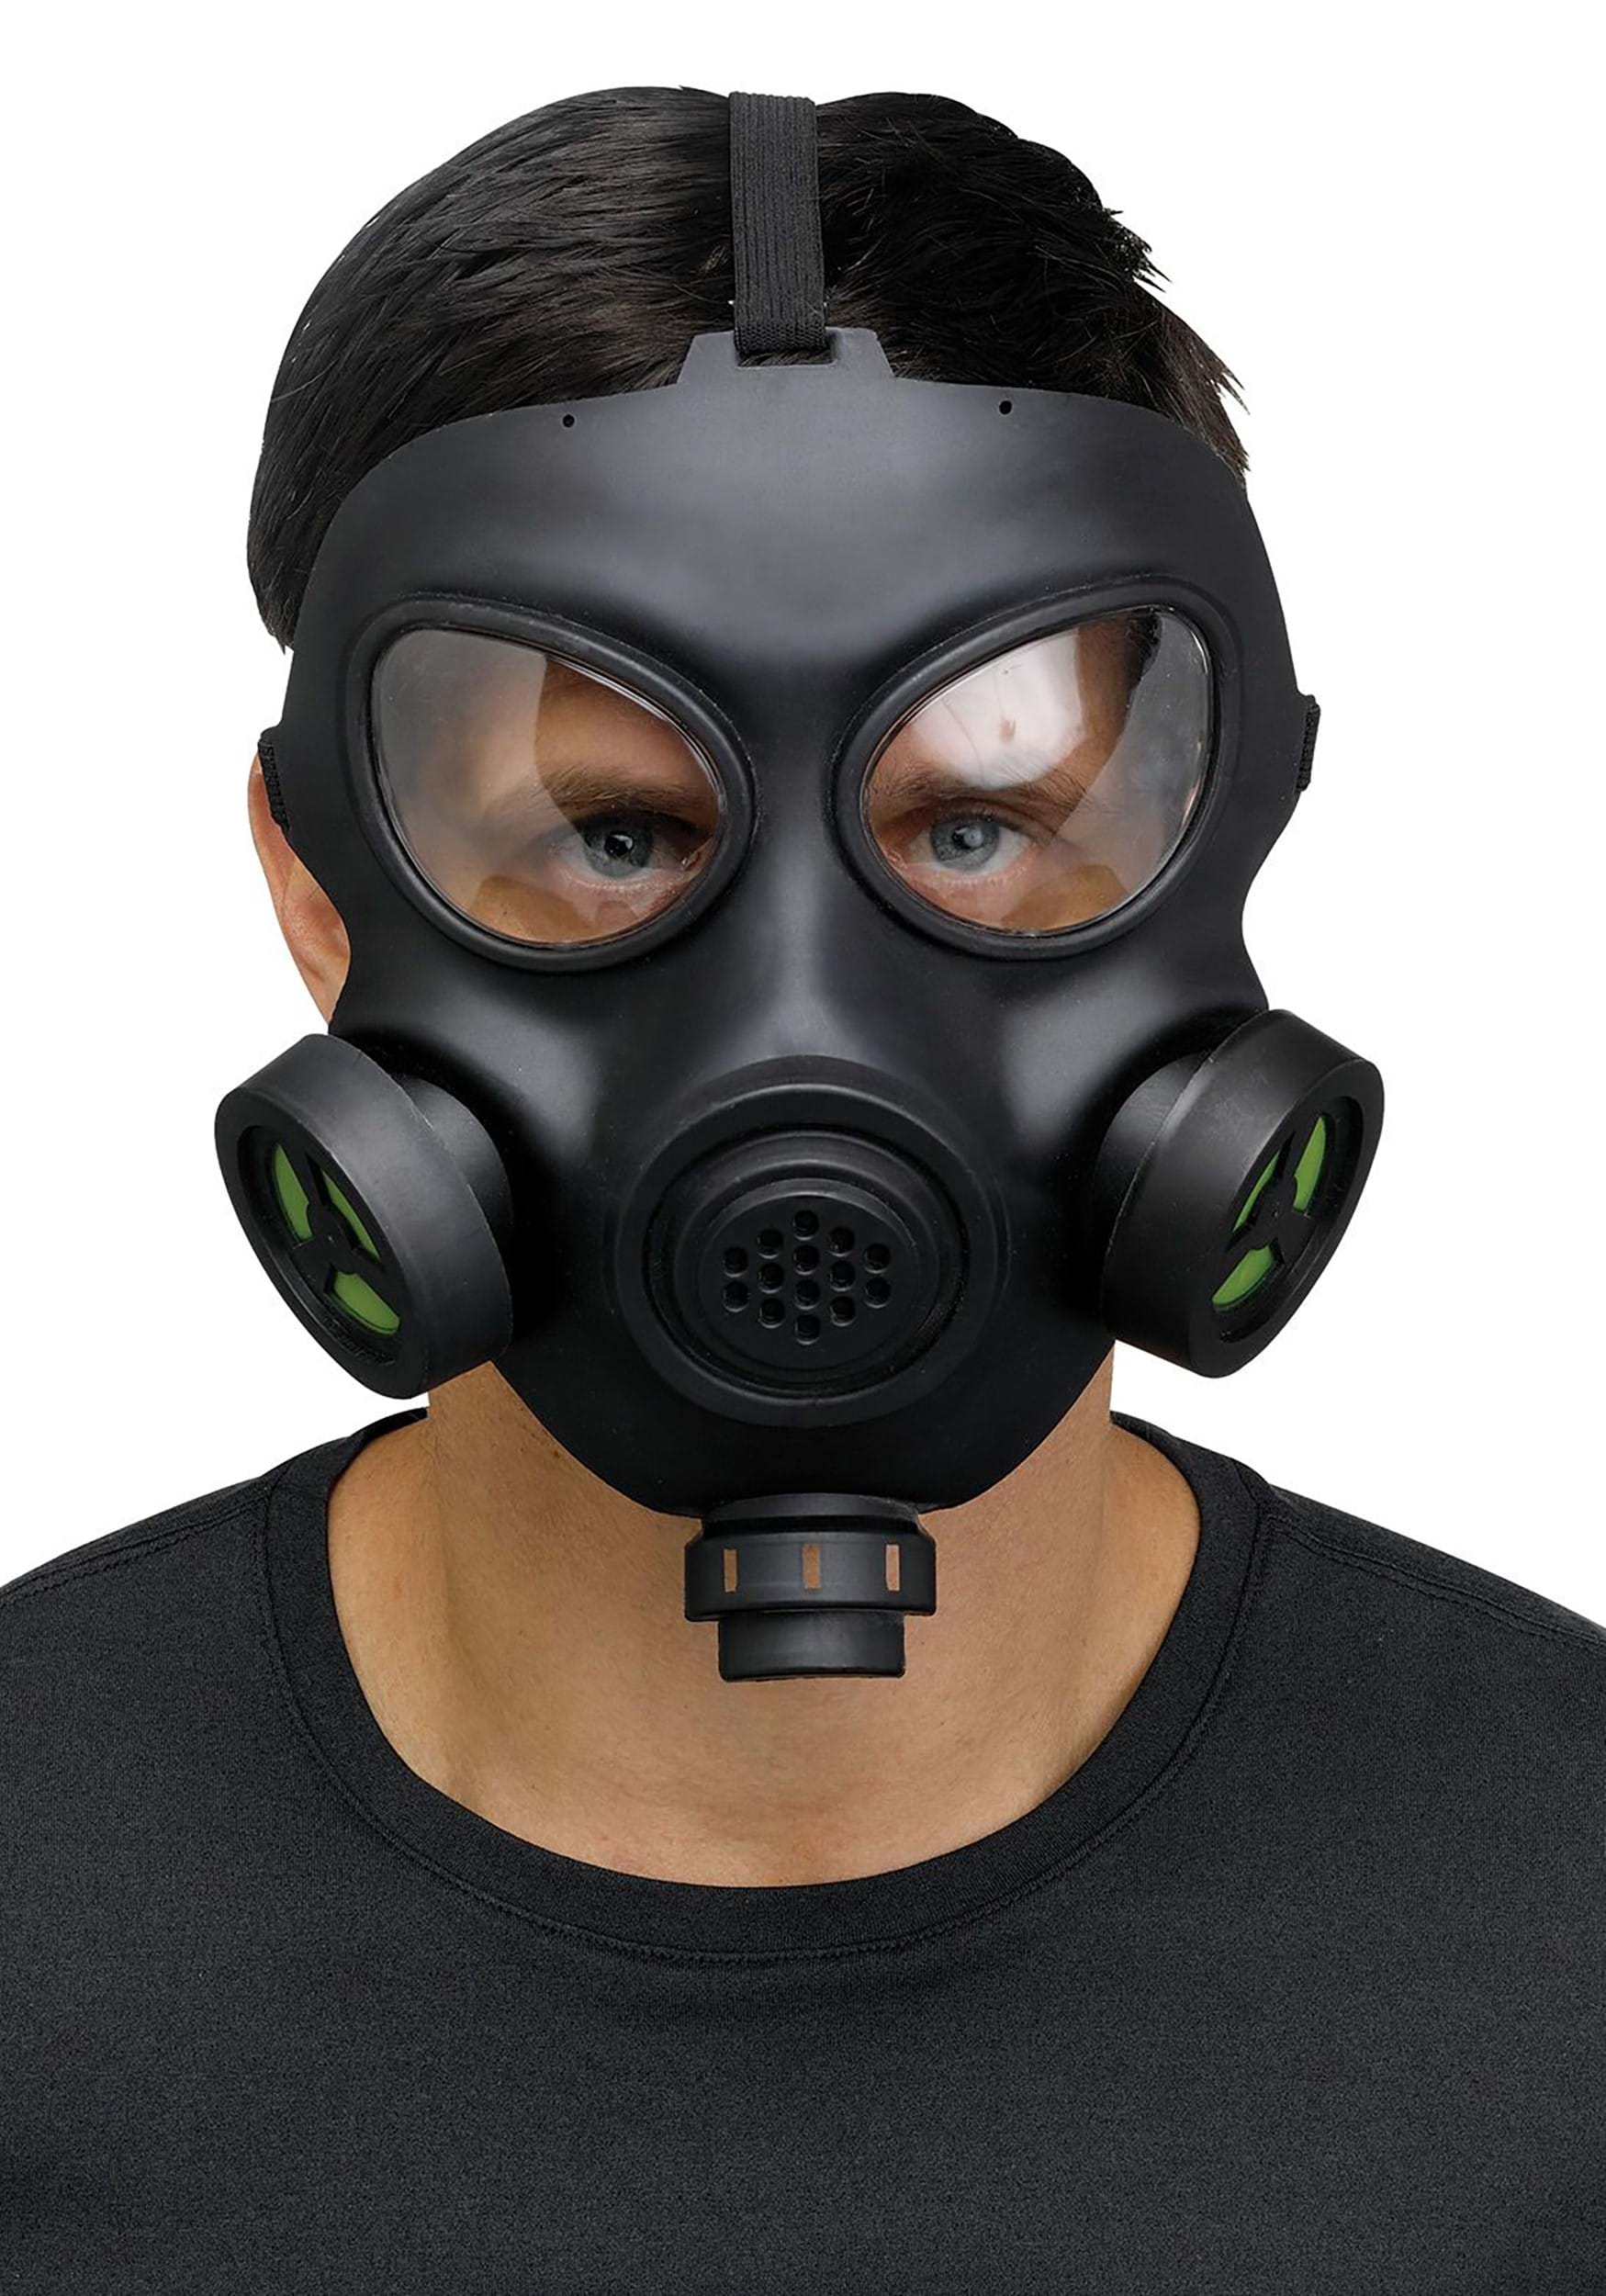 Costume Gas Adult Mask with Toy Respirator